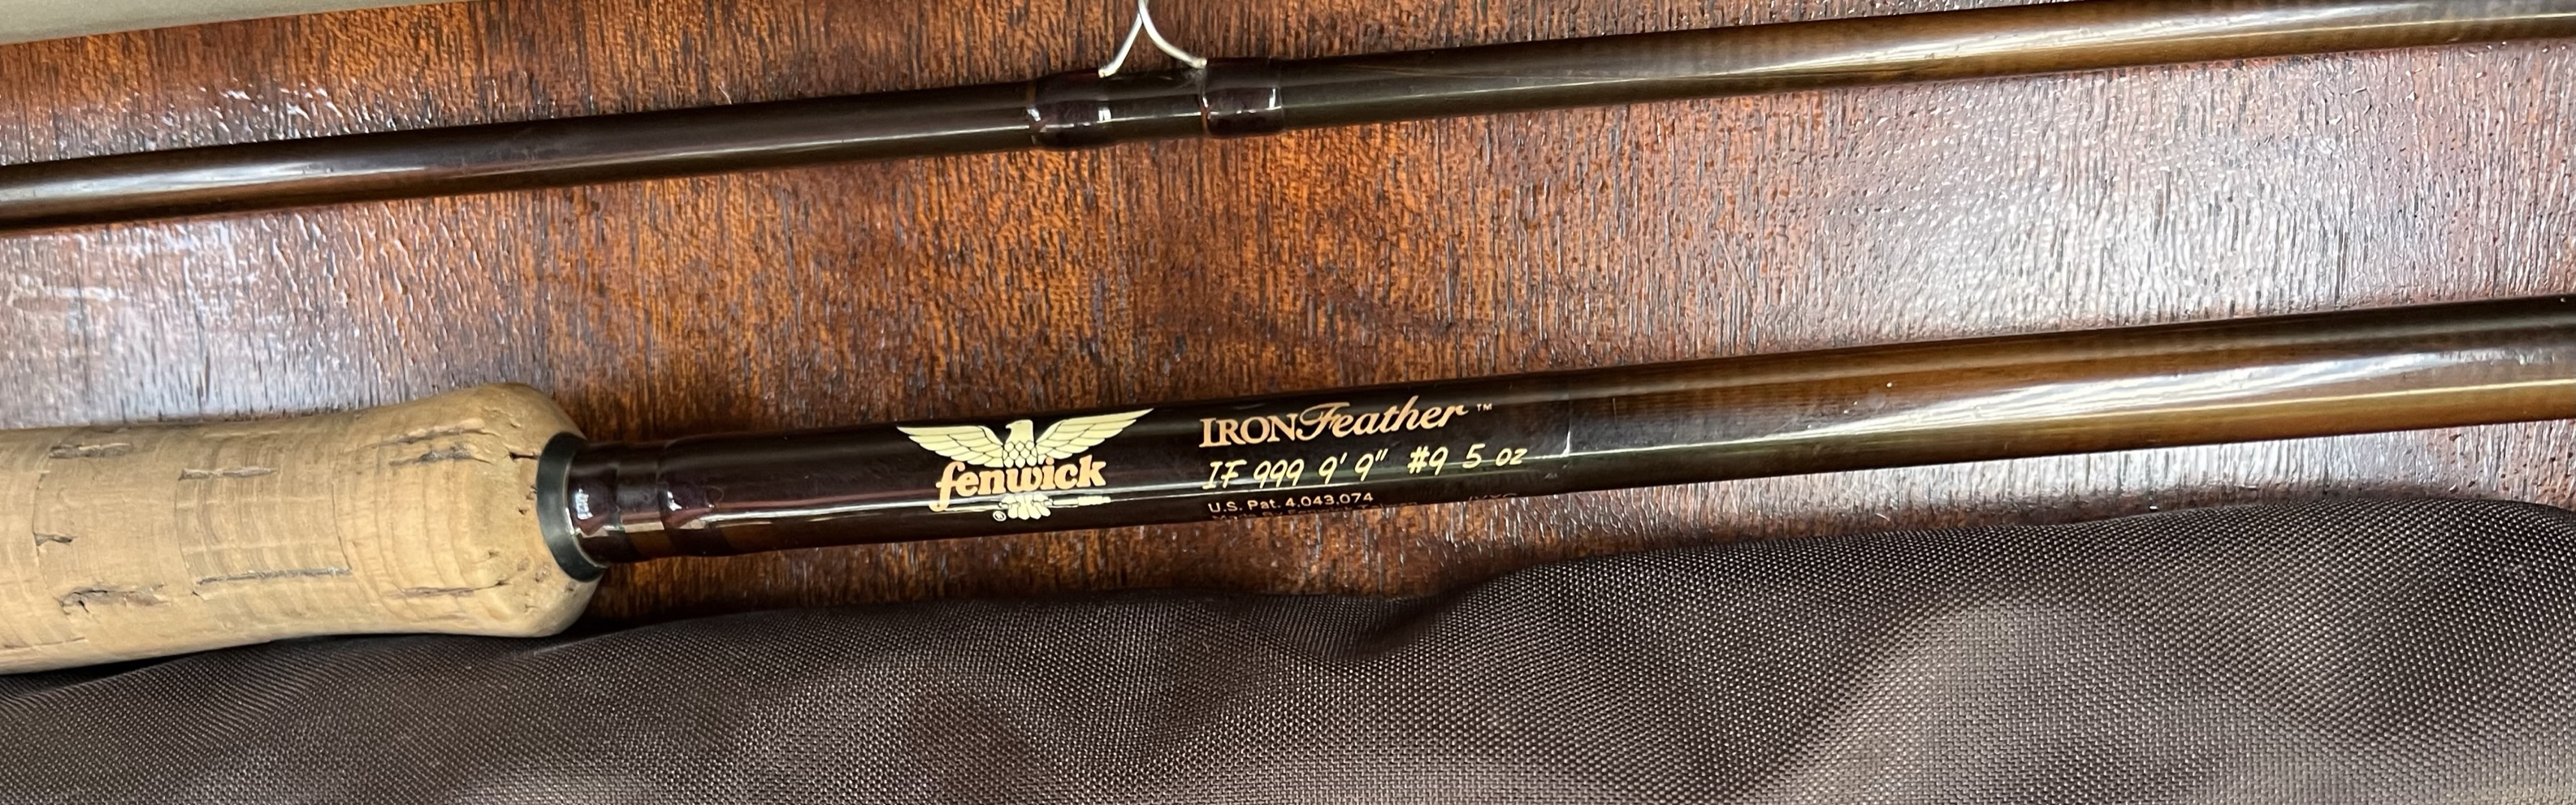 A Fenwick Iron Feather IF 999 9'9" fly fishing rod with cover and metal tube together with a - Image 4 of 4